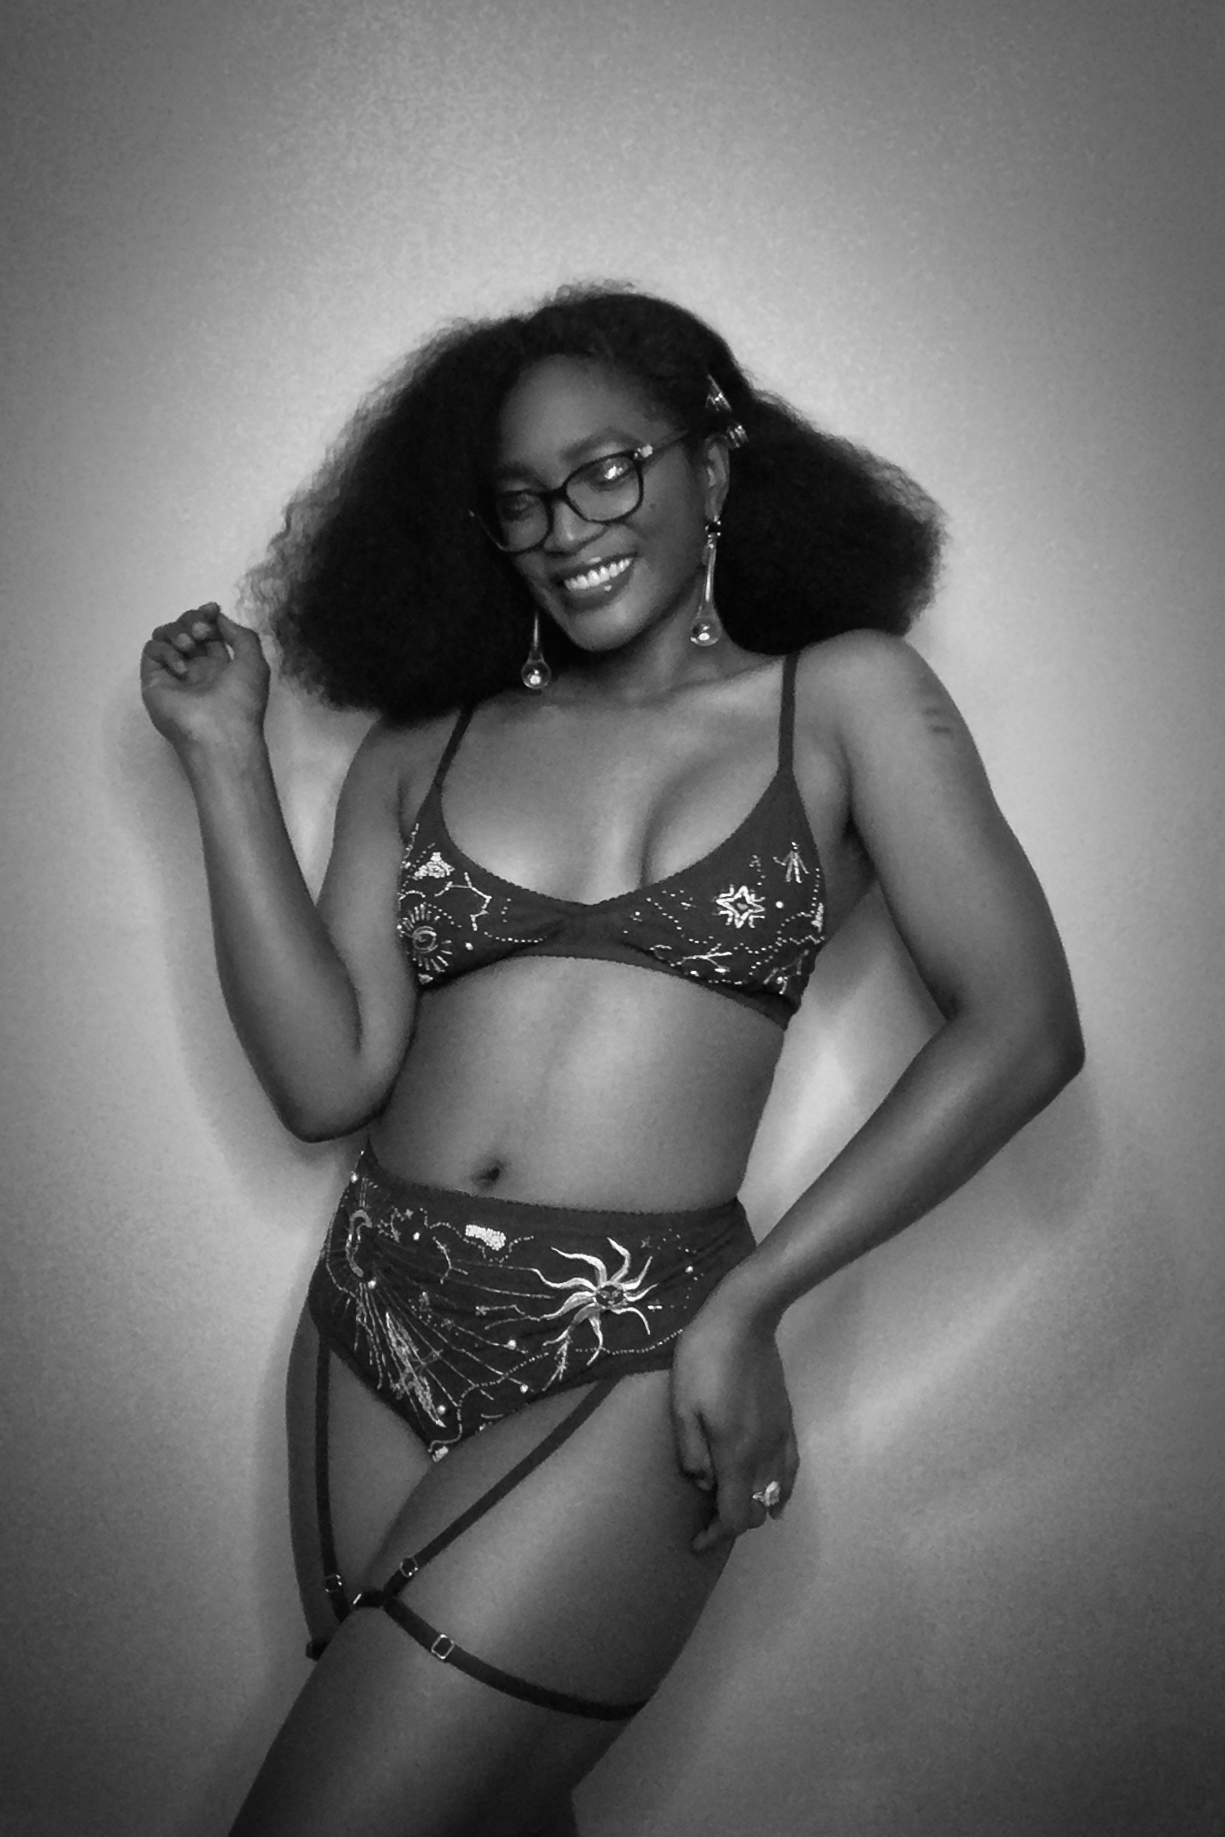 Cora Harrington, The Lingerie Addict, wearing Love and Swans Lingerie, photographed by Tigz Rice